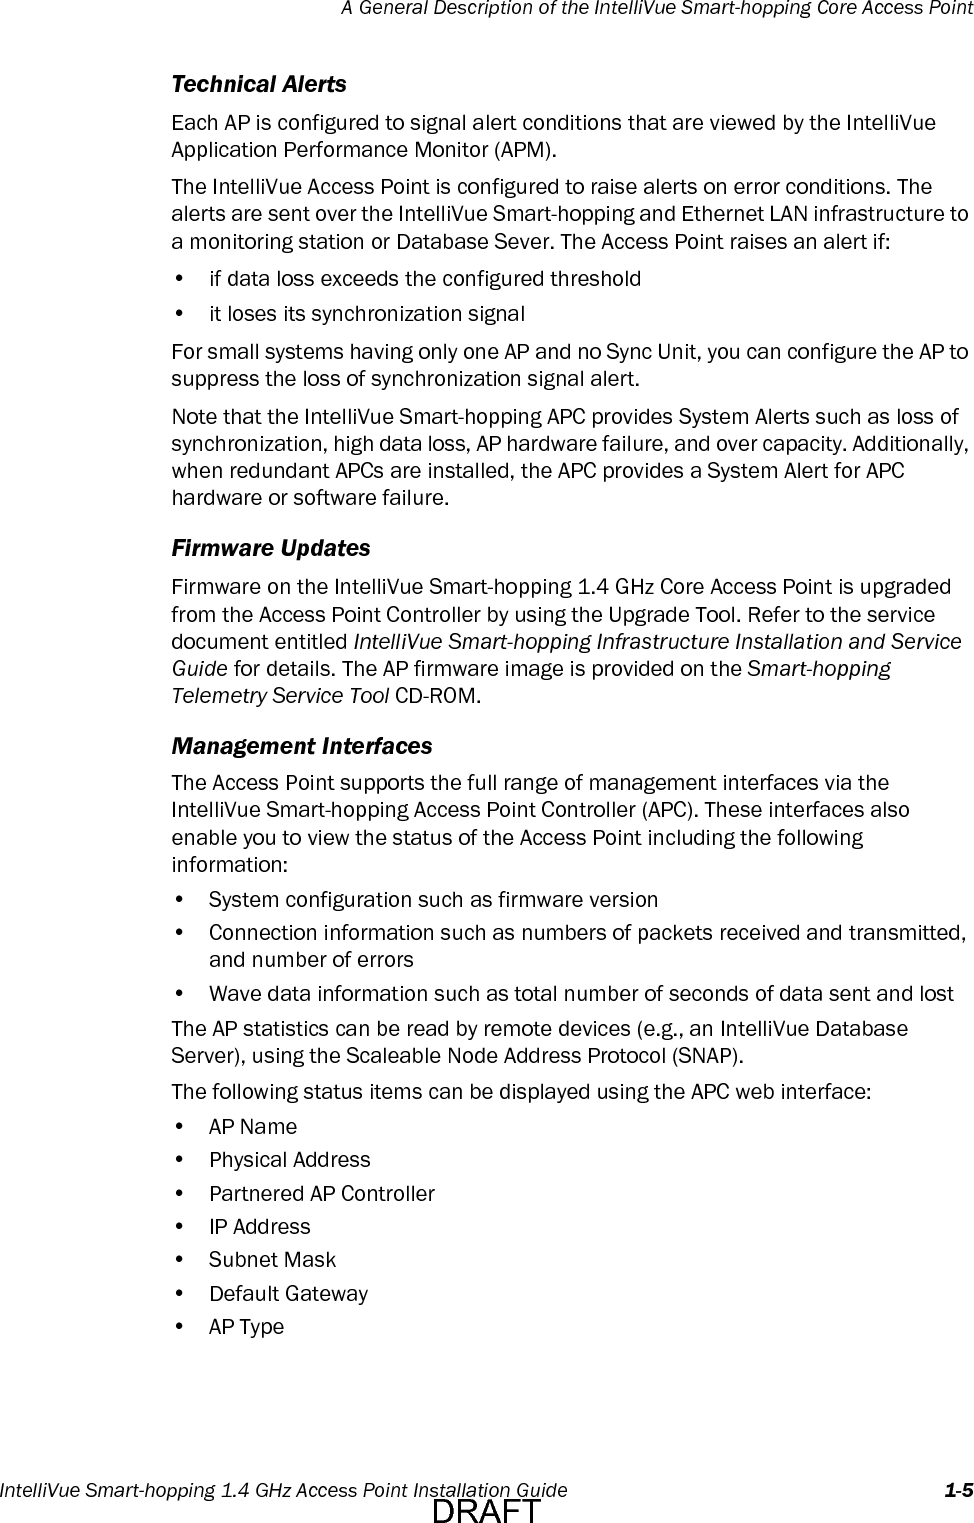 A General Description of the IntelliVue Smart-hopping Core Access PointIntelliVue Smart-hopping 1.4 GHz Access Point Installation Guide 1-5Technical AlertsEach AP is configured to signal alert conditions that are viewed by the IntelliVue Application Performance Monitor (APM).The IntelliVue Access Point is configured to raise alerts on error conditions. The alerts are sent over the IntelliVue Smart-hopping and Ethernet LAN infrastructure to a monitoring station or Database Sever. The Access Point raises an alert if:• if data loss exceeds the configured threshold• it loses its synchronization signalFor small systems having only one AP and no Sync Unit, you can configure the AP to suppress the loss of synchronization signal alert.Note that the IntelliVue Smart-hopping APC provides System Alerts such as loss of synchronization, high data loss, AP hardware failure, and over capacity. Additionally, when redundant APCs are installed, the APC provides a System Alert for APC hardware or software failure.Firmware UpdatesFirmware on the IntelliVue Smart-hopping 1.4 GHz Core Access Point is upgraded from the Access Point Controller by using the Upgrade Tool. Refer to the service document entitled IntelliVue Smart-hopping Infrastructure Installation and Service Guide for details. The AP firmware image is provided on the Smart-hopping Telemetry Service Tool CD-ROM.Management InterfacesThe Access Point supports the full range of management interfaces via the IntelliVue Smart-hopping Access Point Controller (APC). These interfaces also enable you to view the status of the Access Point including the following information:• System configuration such as firmware version• Connection information such as numbers of packets received and transmitted,and number of errors• Wave data information such as total number of seconds of data sent and lostThe AP statistics can be read by remote devices (e.g., an IntelliVue DatabaseServer), using the Scaleable Node Address Protocol (SNAP).The following status items can be displayed using the APC web interface:•AP Name• Physical Address• Partnered AP Controller•IP Address•Subnet Mask• Default Gateway•AP TypeDRAFT